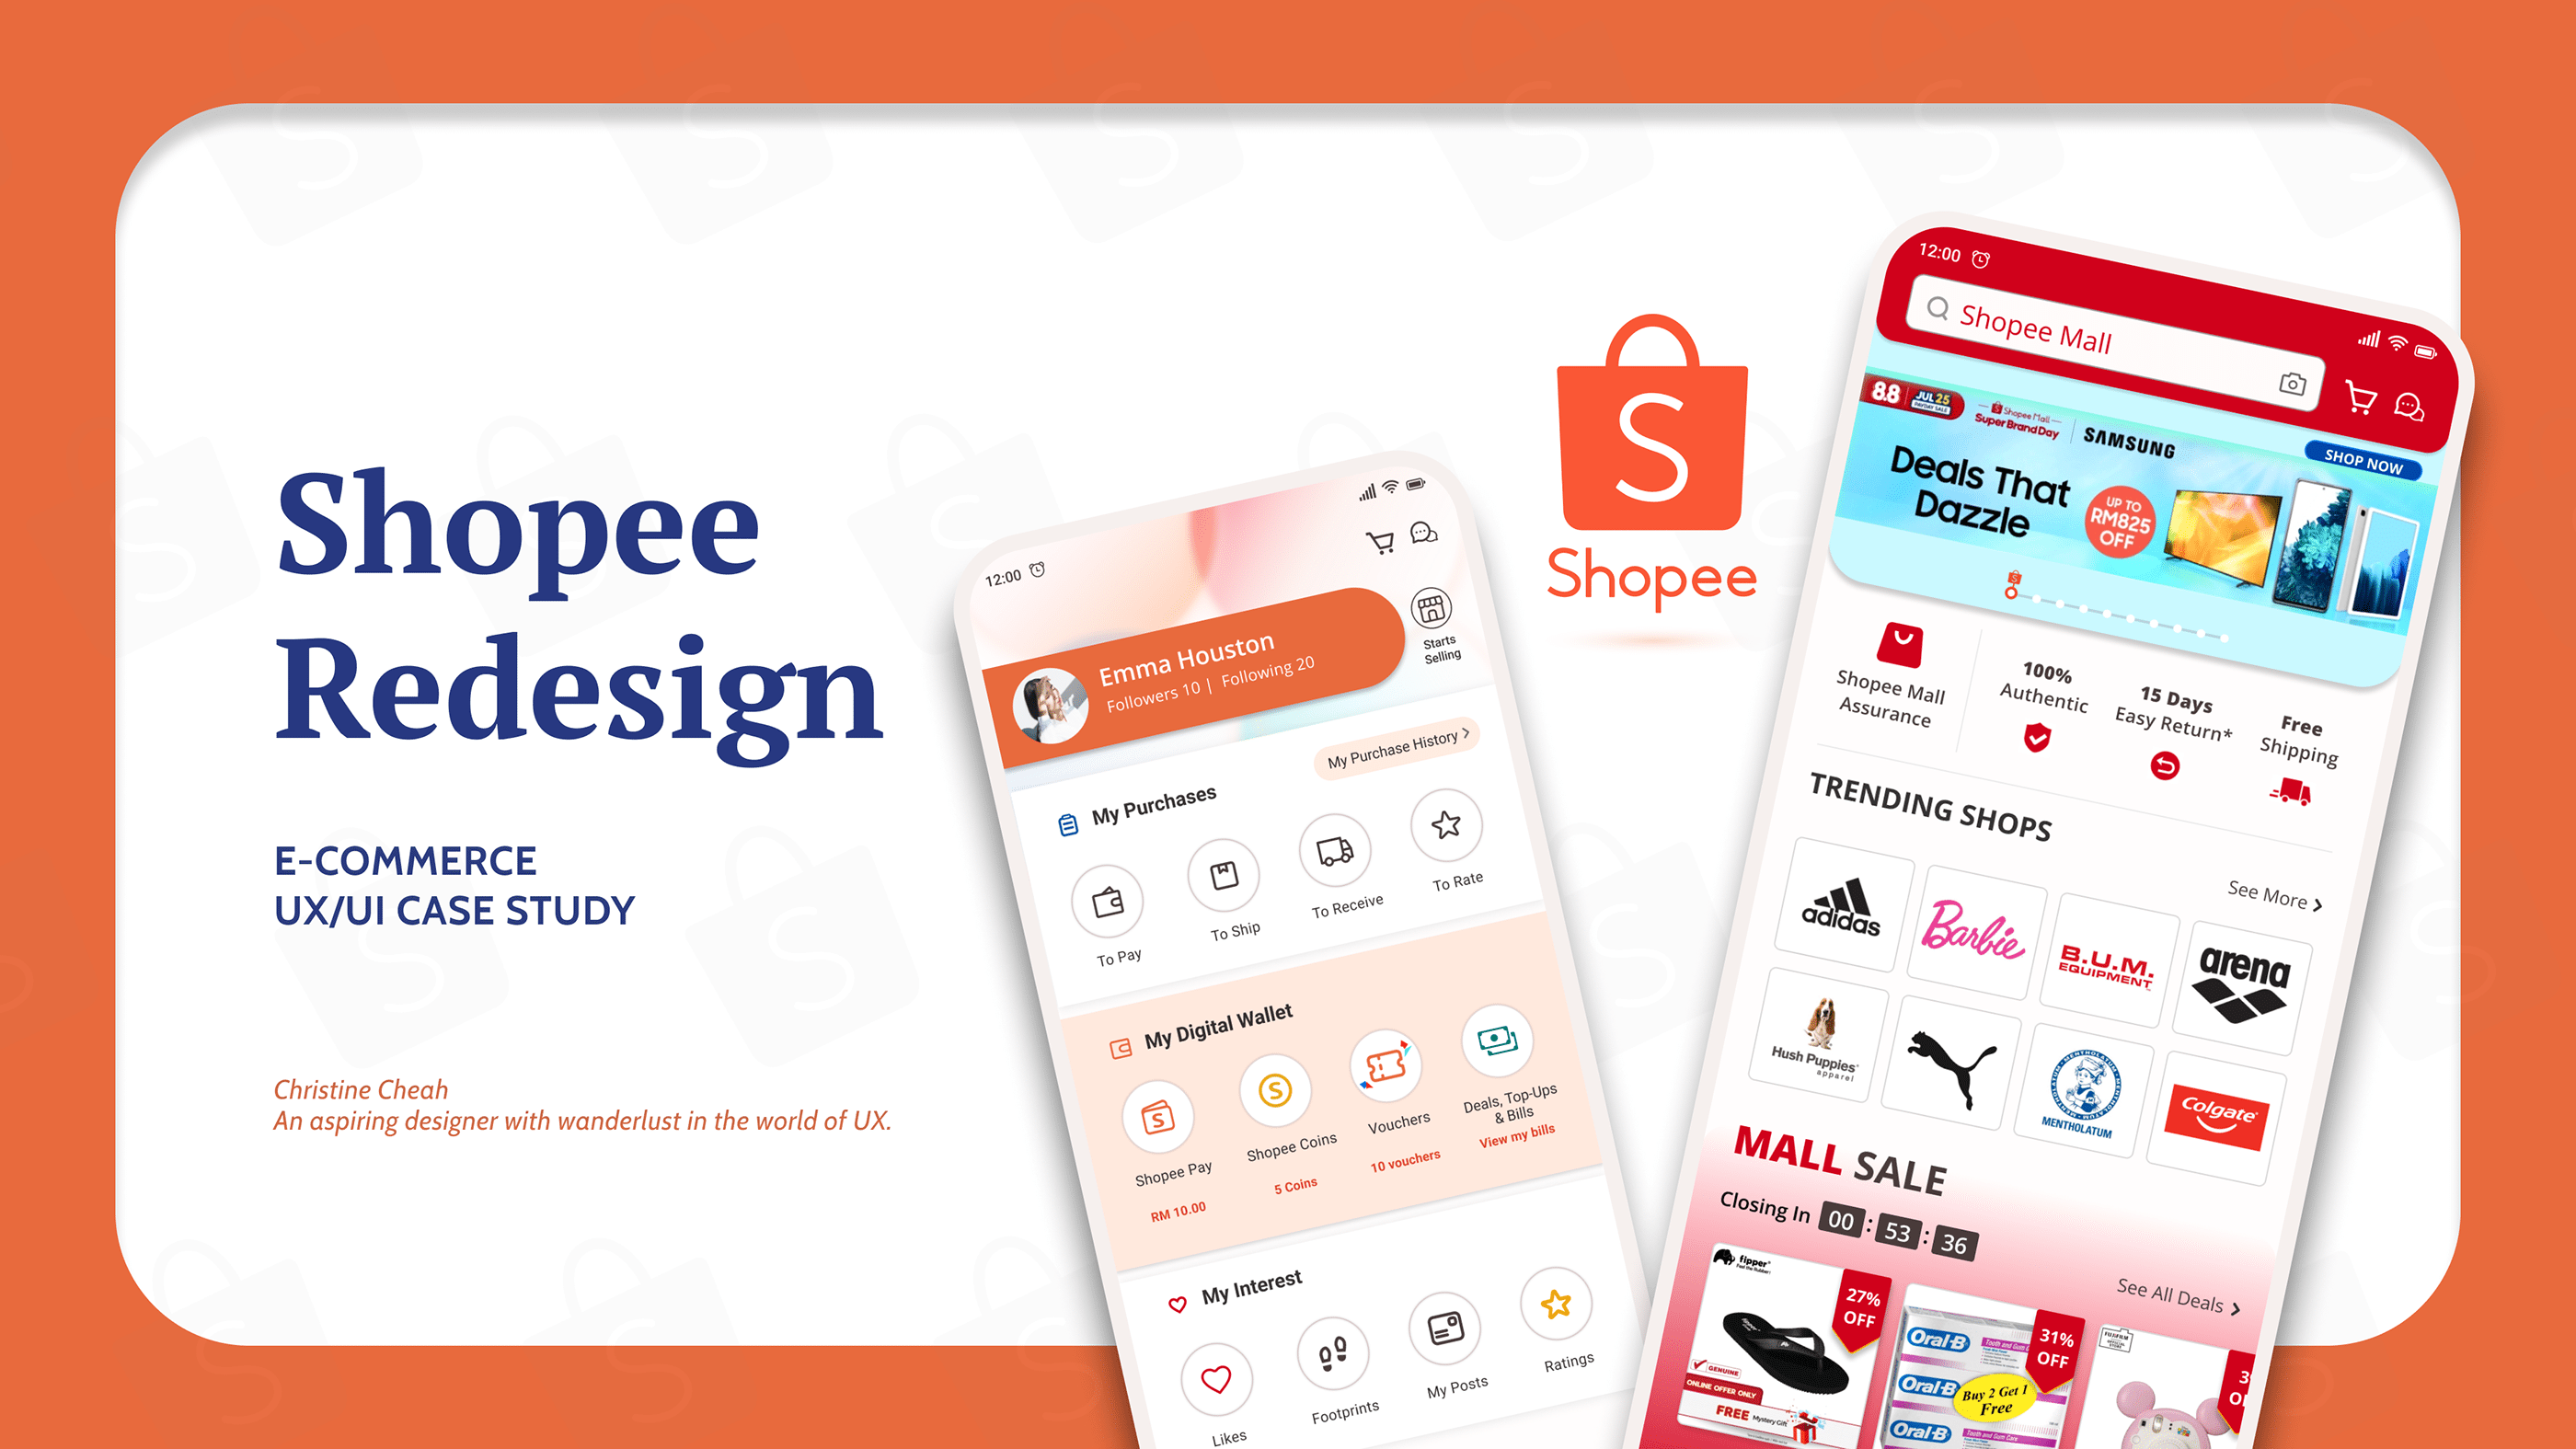 Shopee Redesign UX/UI research Case Study on Behance